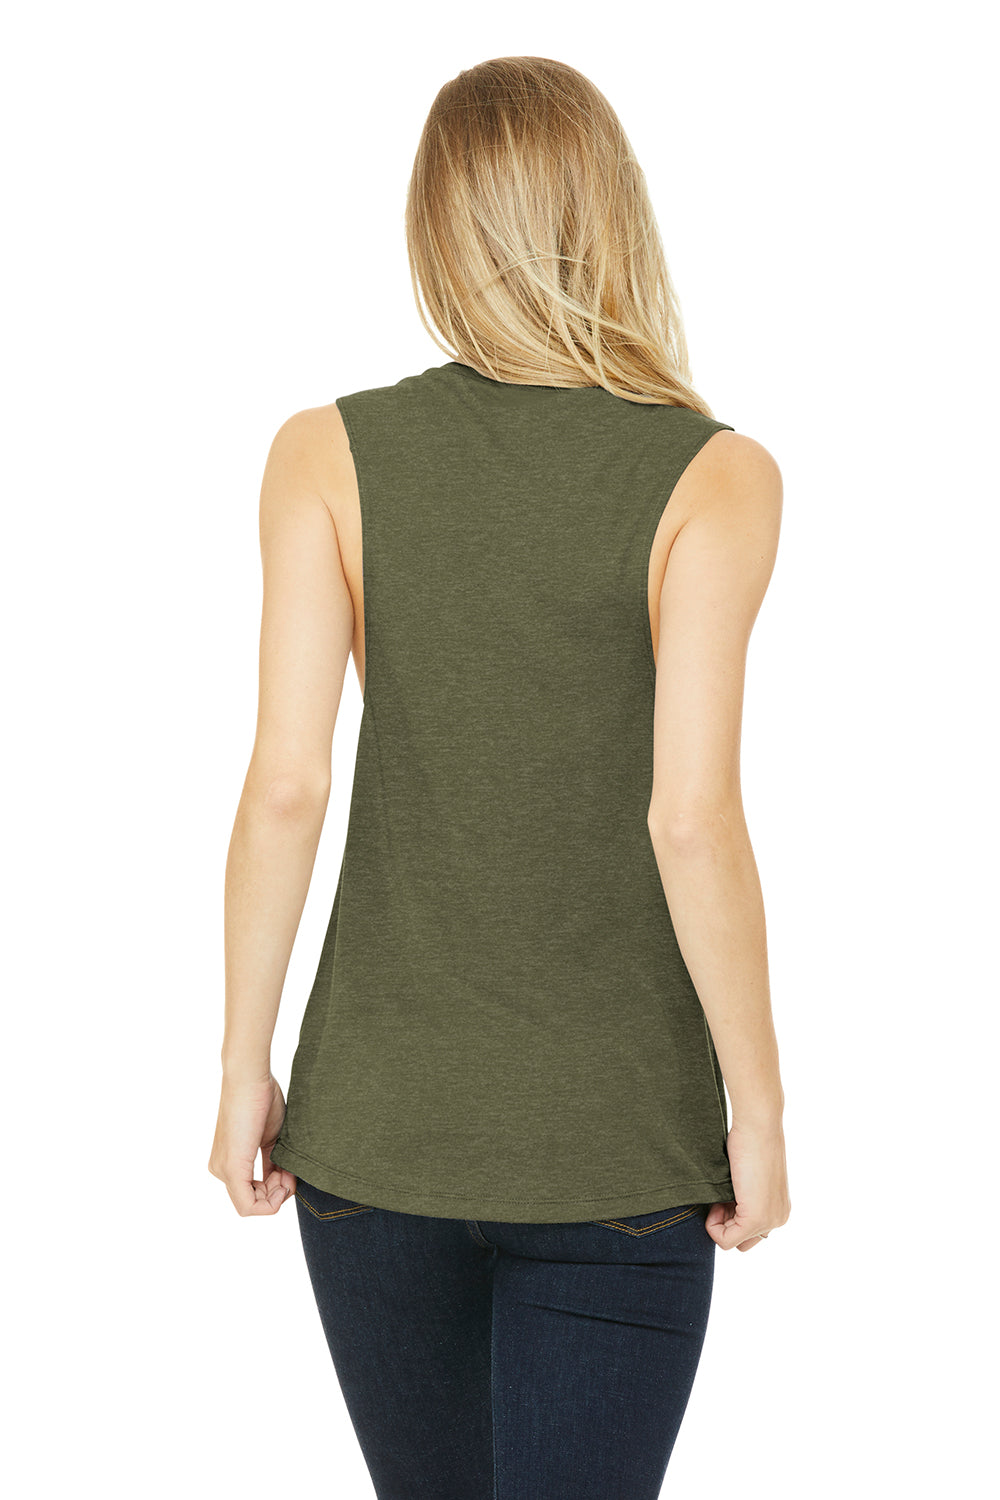 Bella + Canvas BC8803/B8803/8803 Womens Flowy Muscle Tank Top Heather Olive Green Model Back